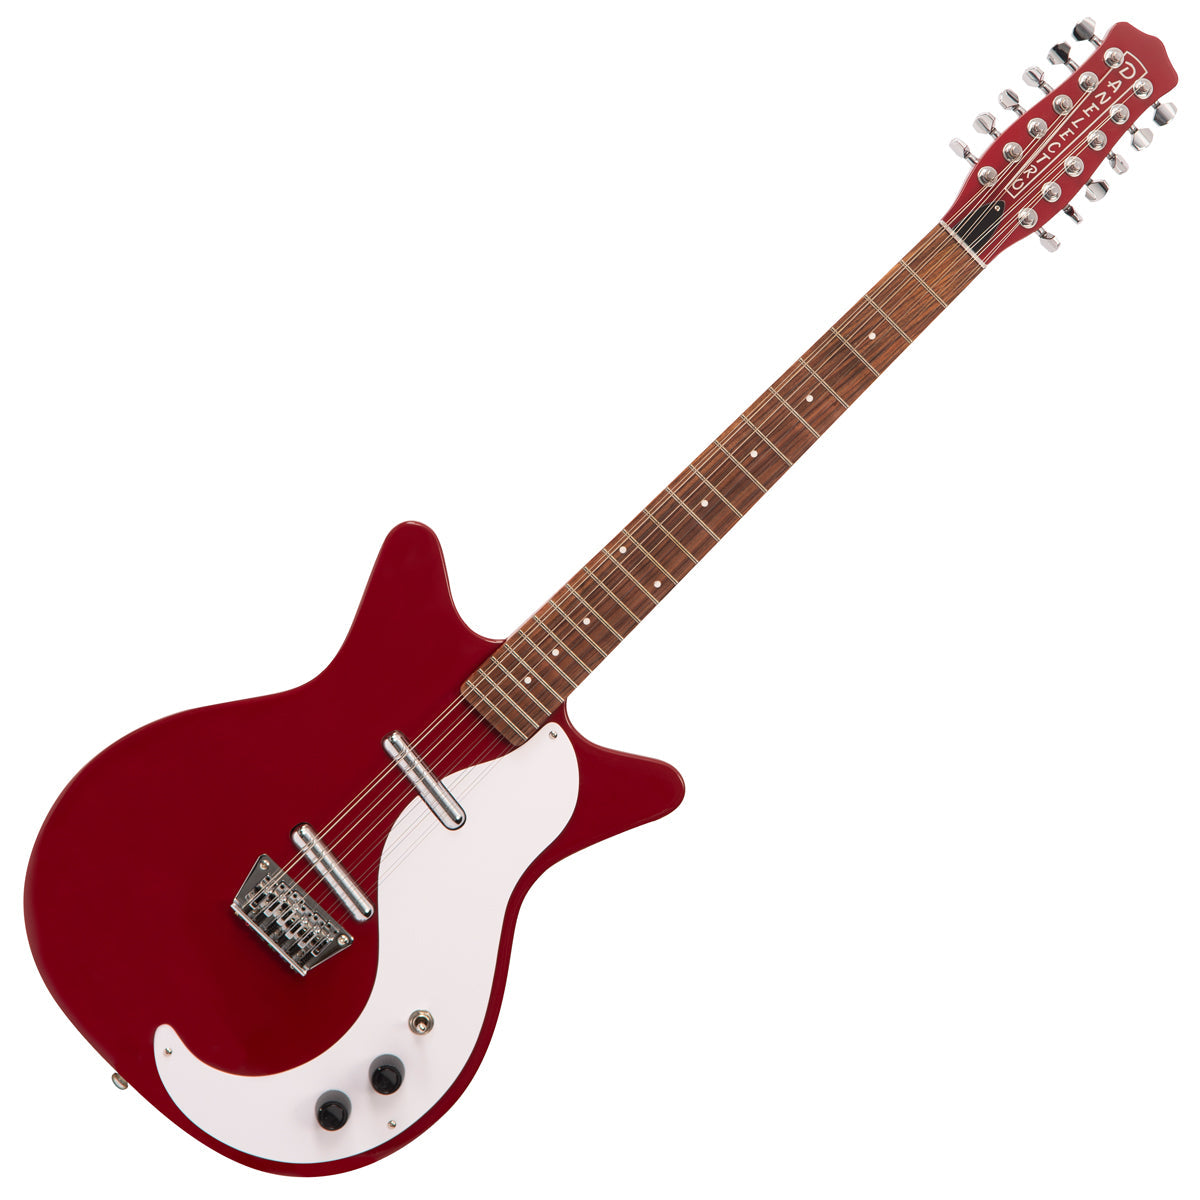 Danelectro '59 12 String Guitar ~ Red, Electric Guitar for sale at Richards Guitars.